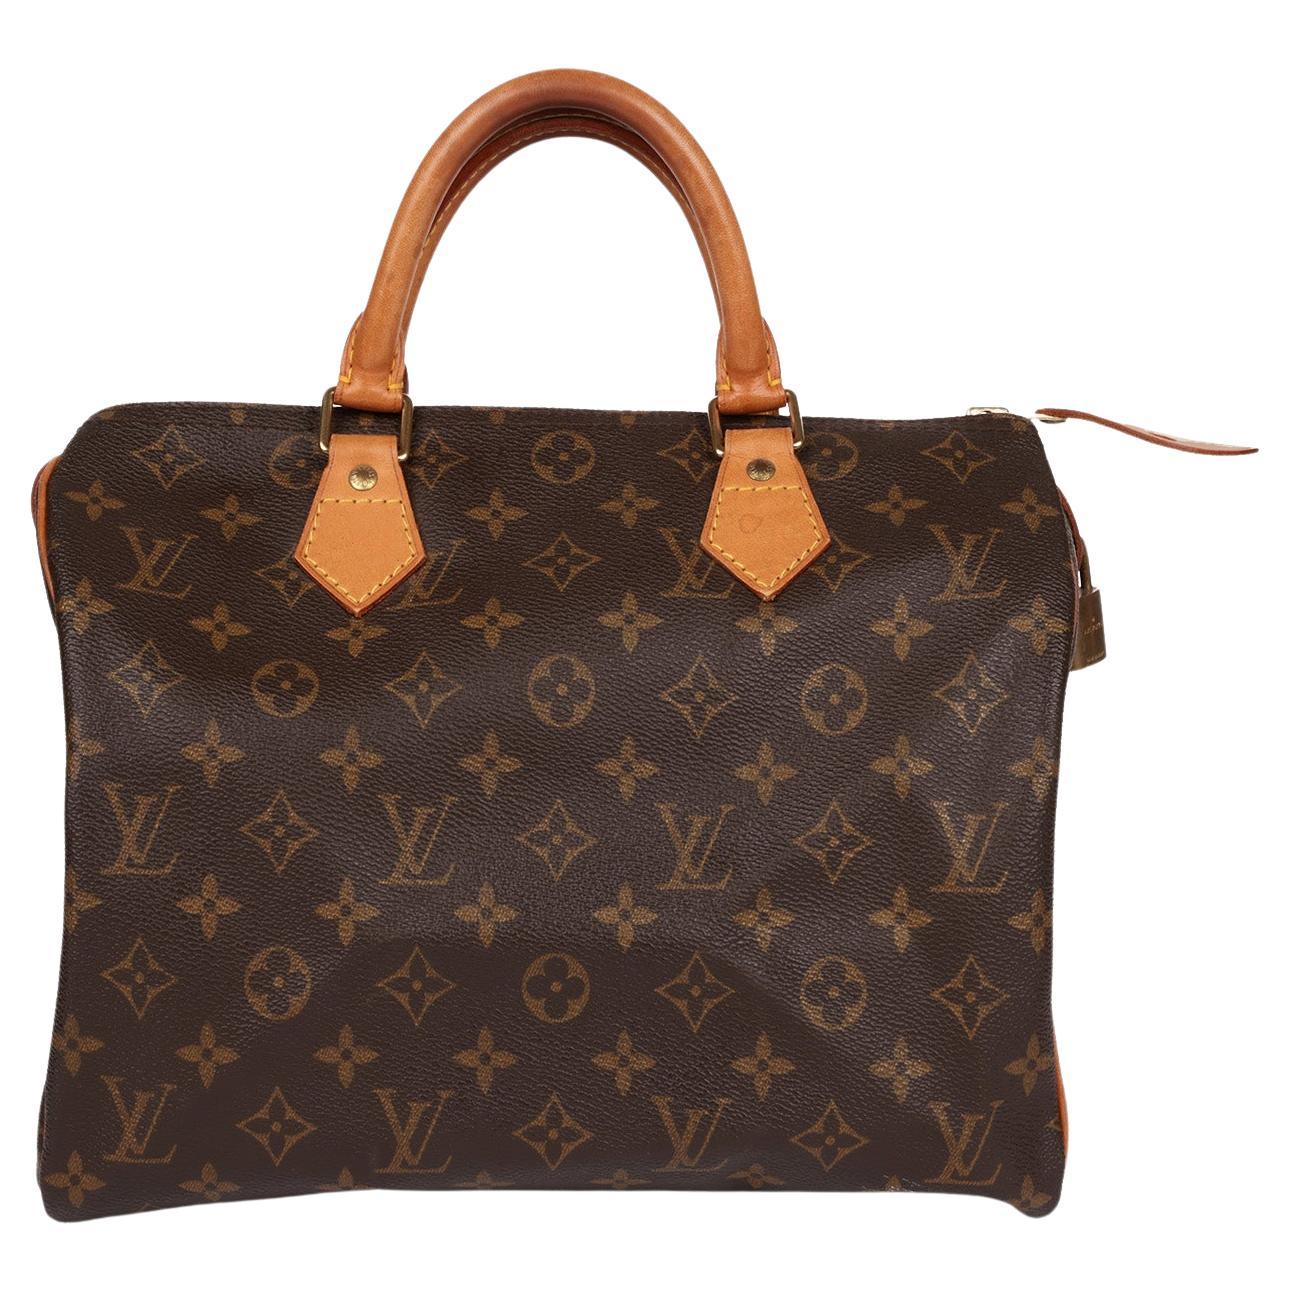 Do all Louis Vuitton bags come with a lock and key?